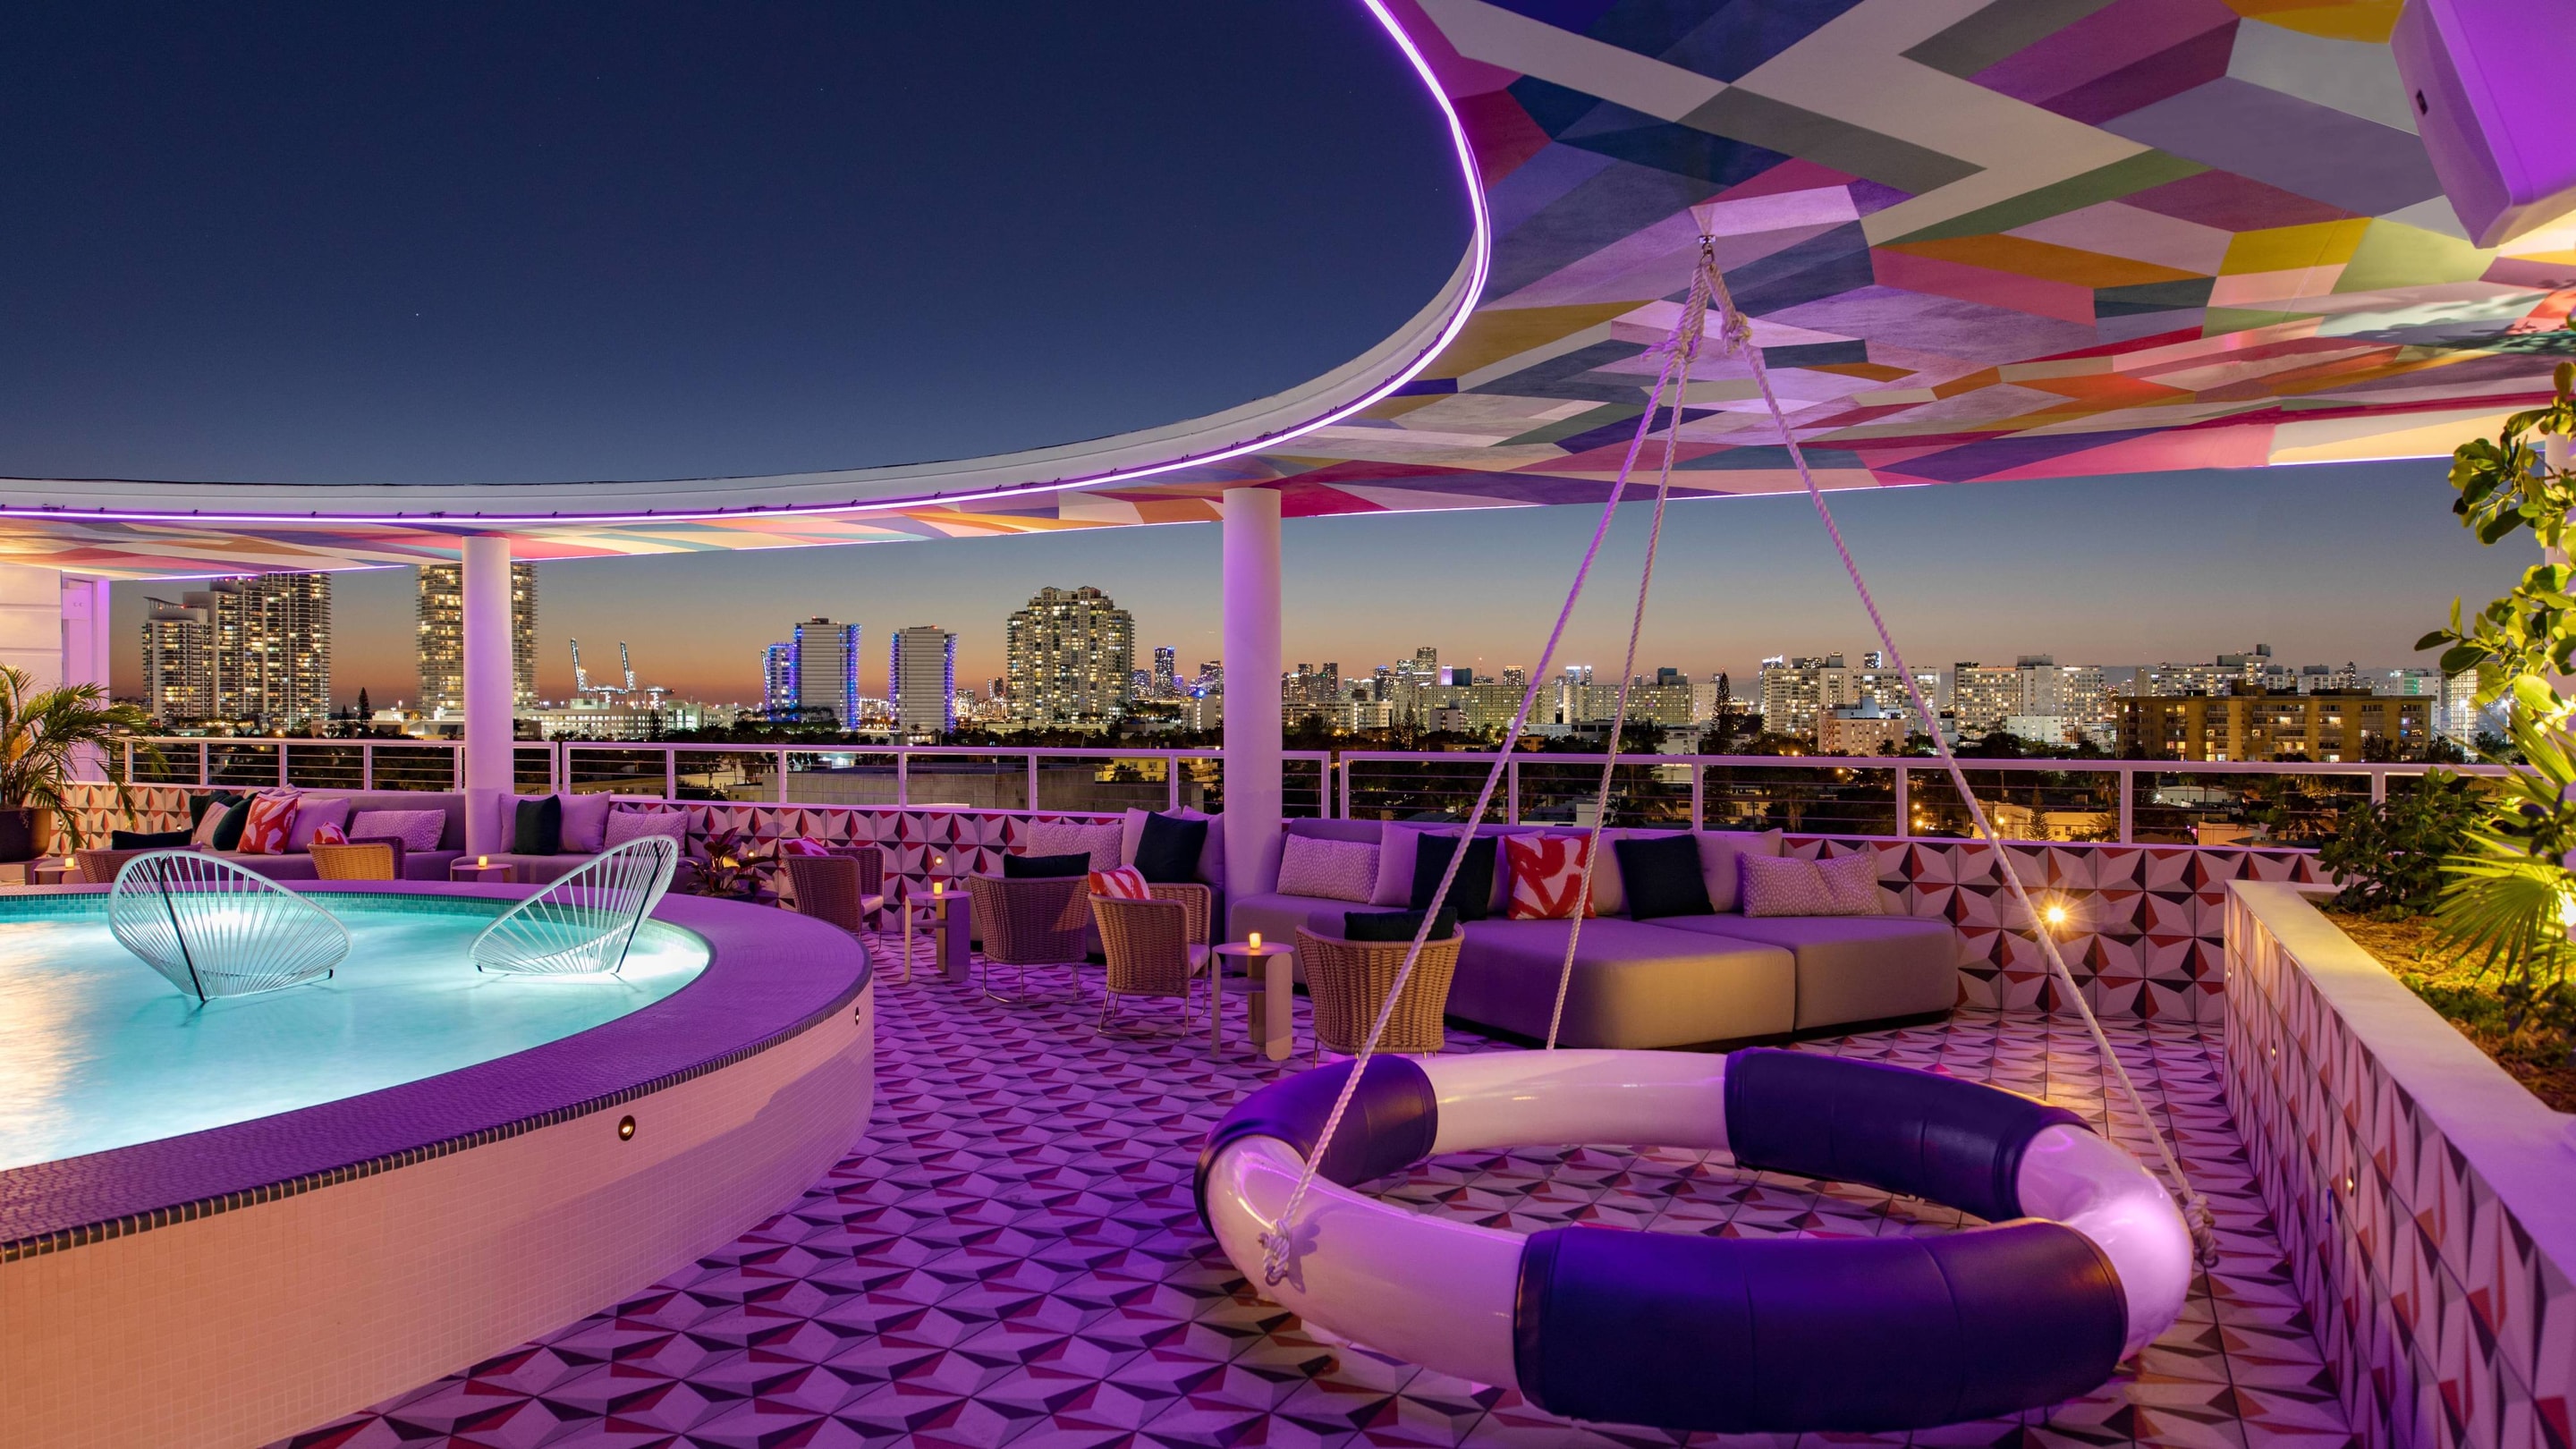 The upside rooftop bar and lounge area with colorful design and fun seating